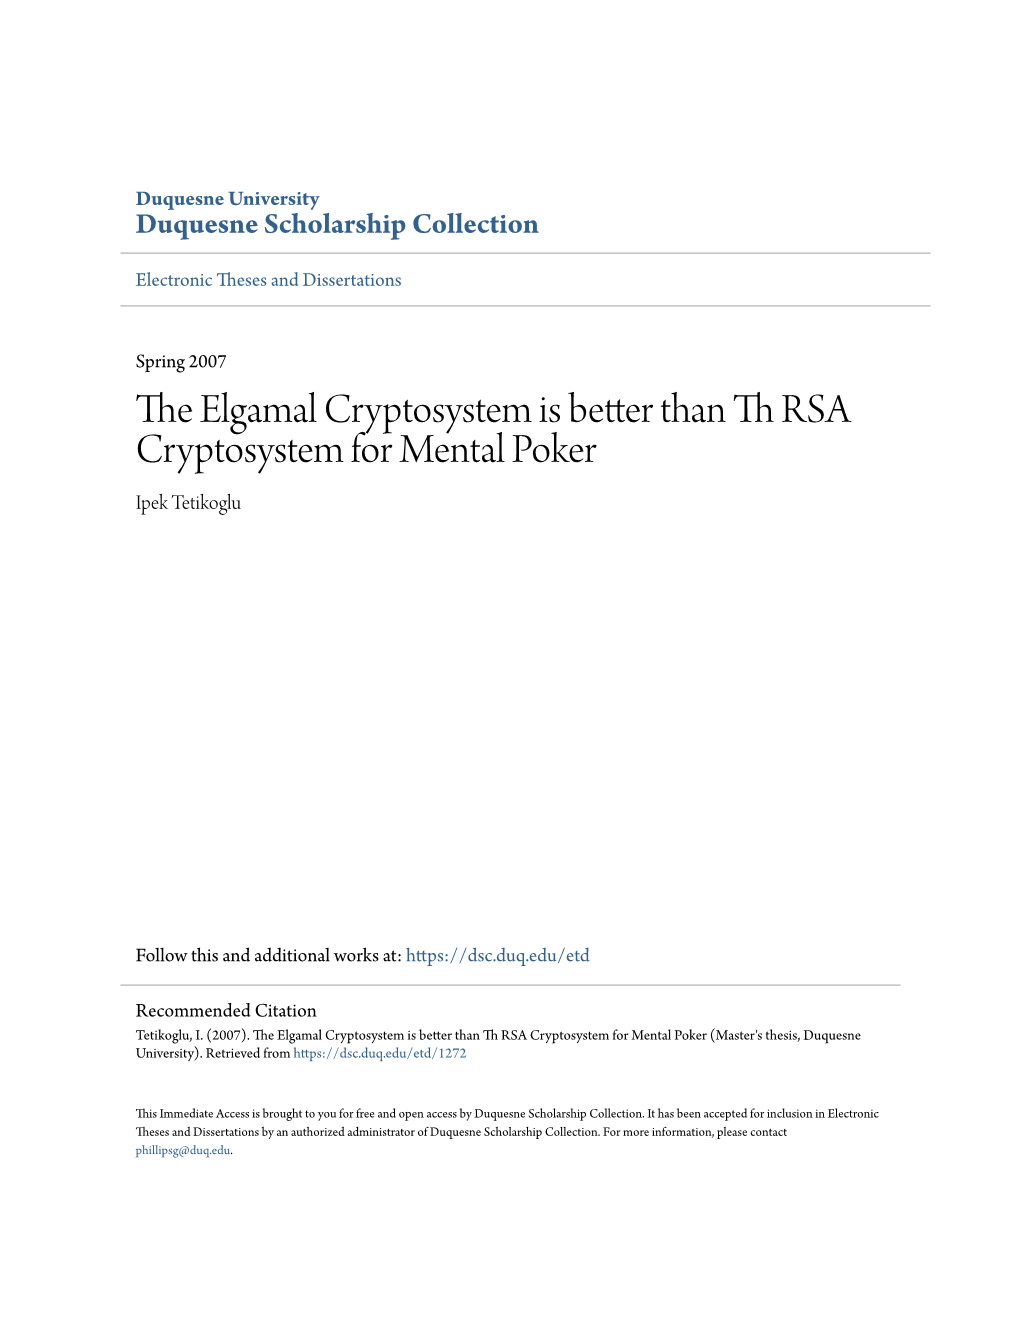 The Elgamal Cryptosystem Is Better Than Th RSA Cryptosystem for Mental Poker (Master's Thesis, Duquesne University)